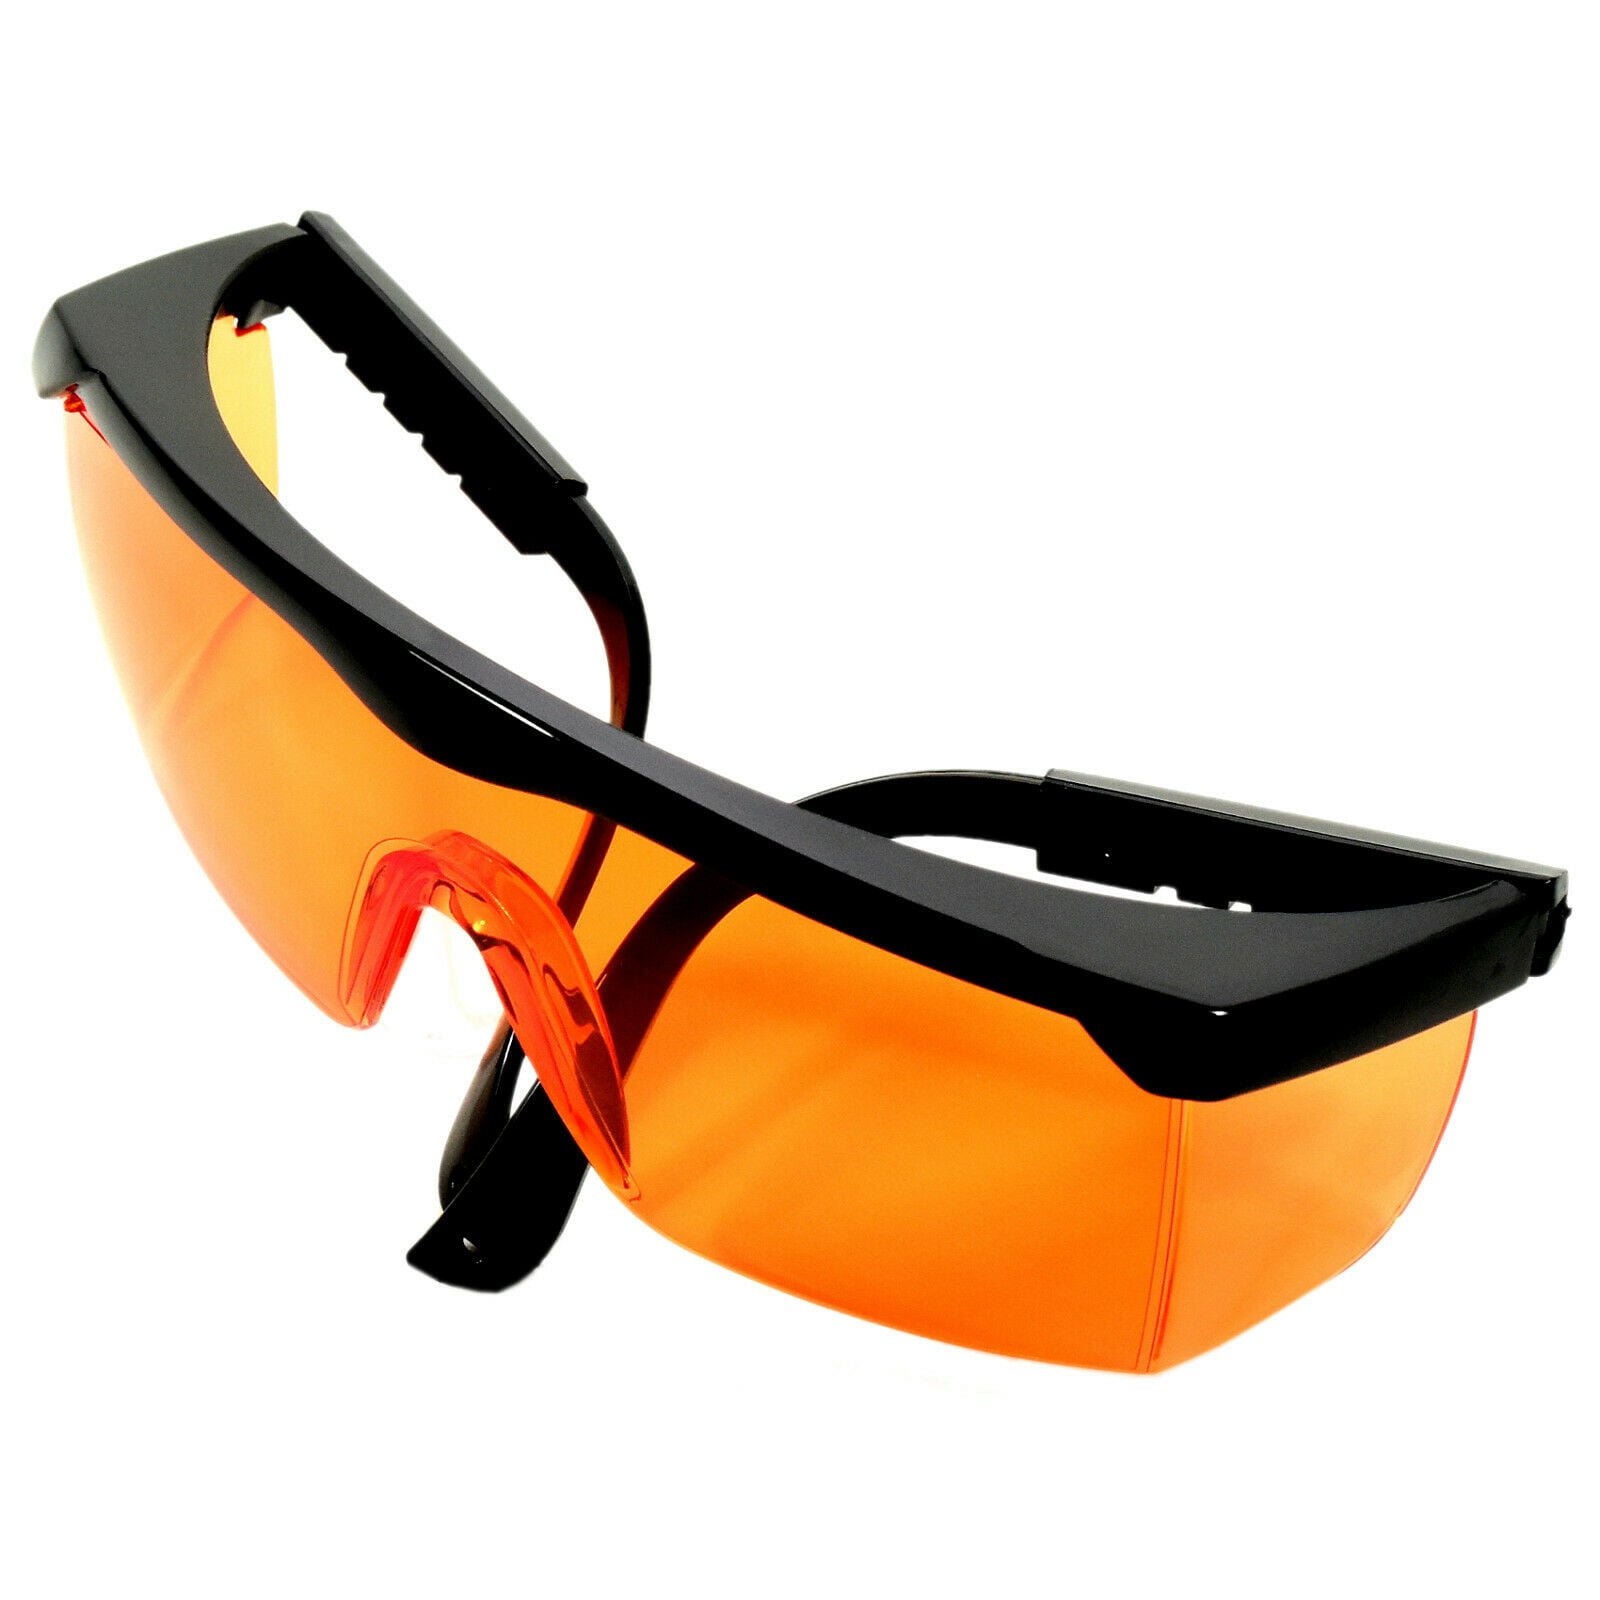 Details about   Adjustable Racing Swimming Goggles UV-Protect Adults Women Glasses Eyewear 